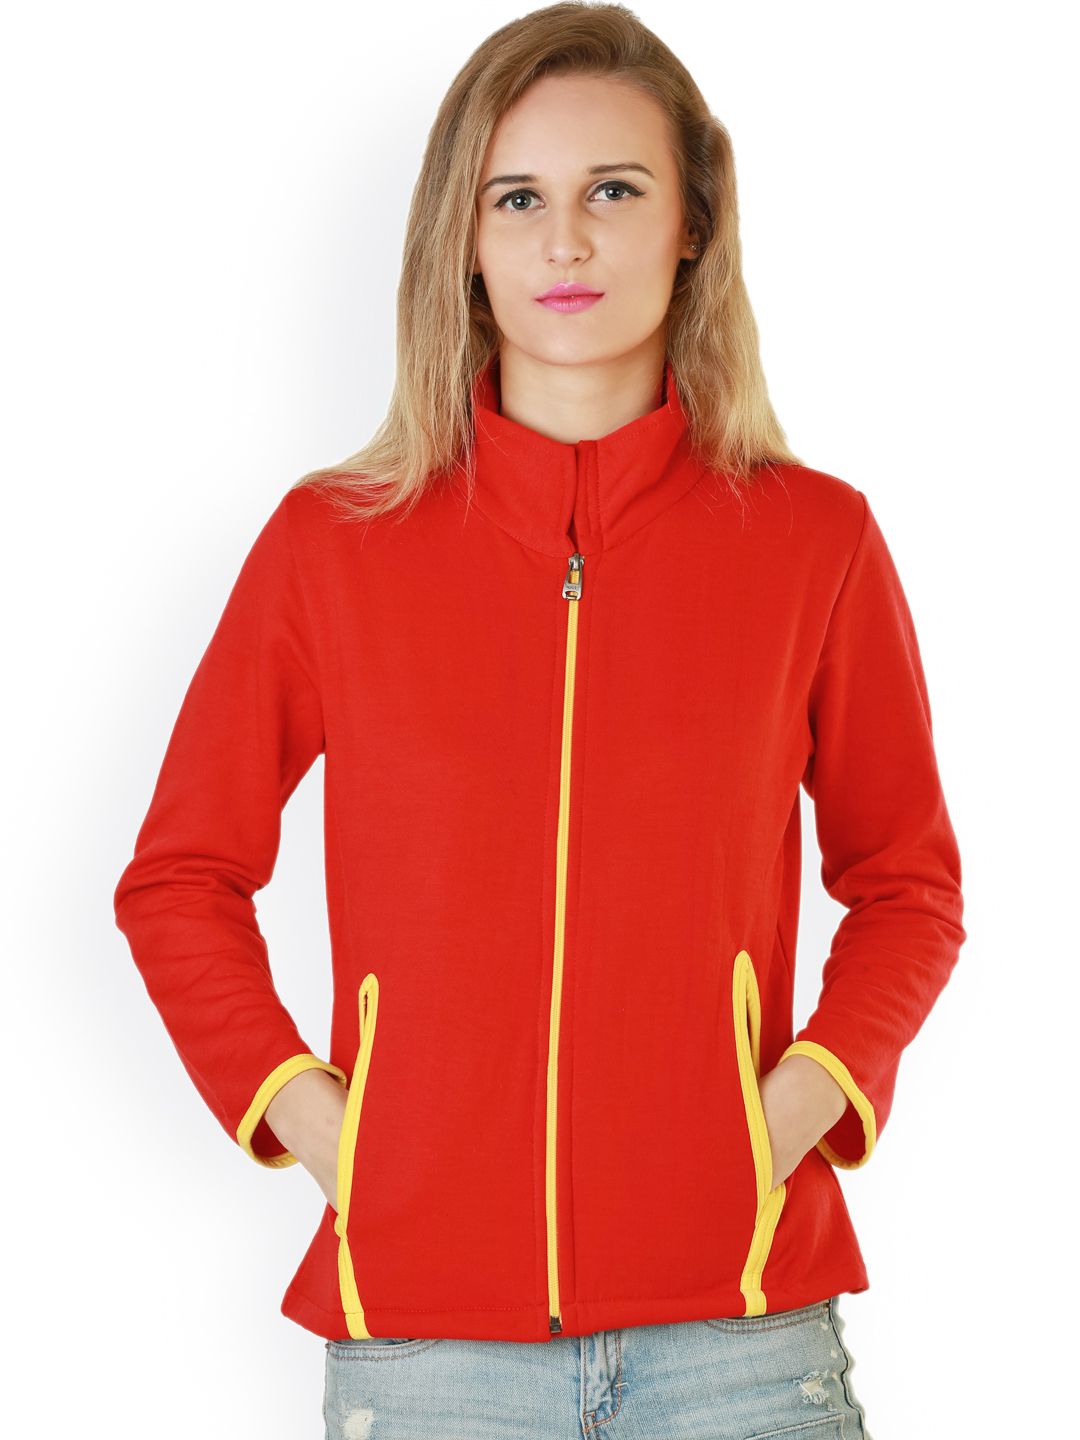 Belle Fille Red Jacket Price in India